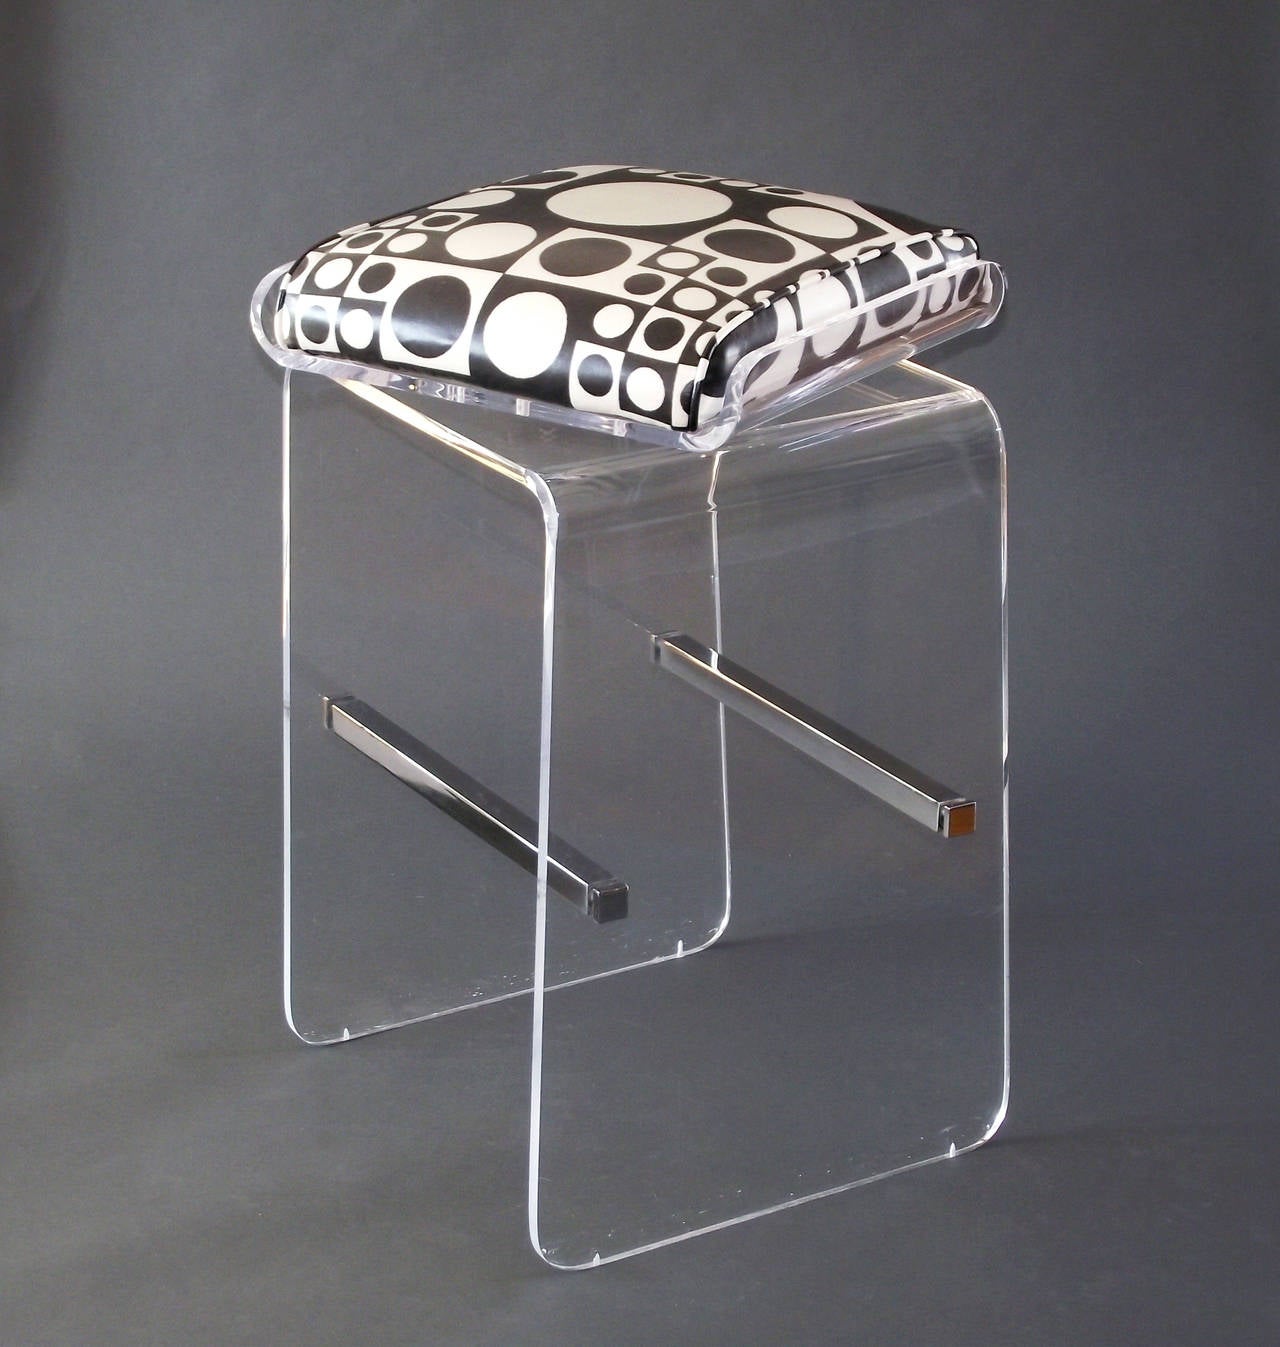 A matching pair of waterfall barstools in lucite with chrome cross stretchers and end caps, upholstered in a graphic op-art vinyl fabric, designed by Charles Hollis Jones. The seats swivel a full 360 degrees and do so smoothly. *Please note: the